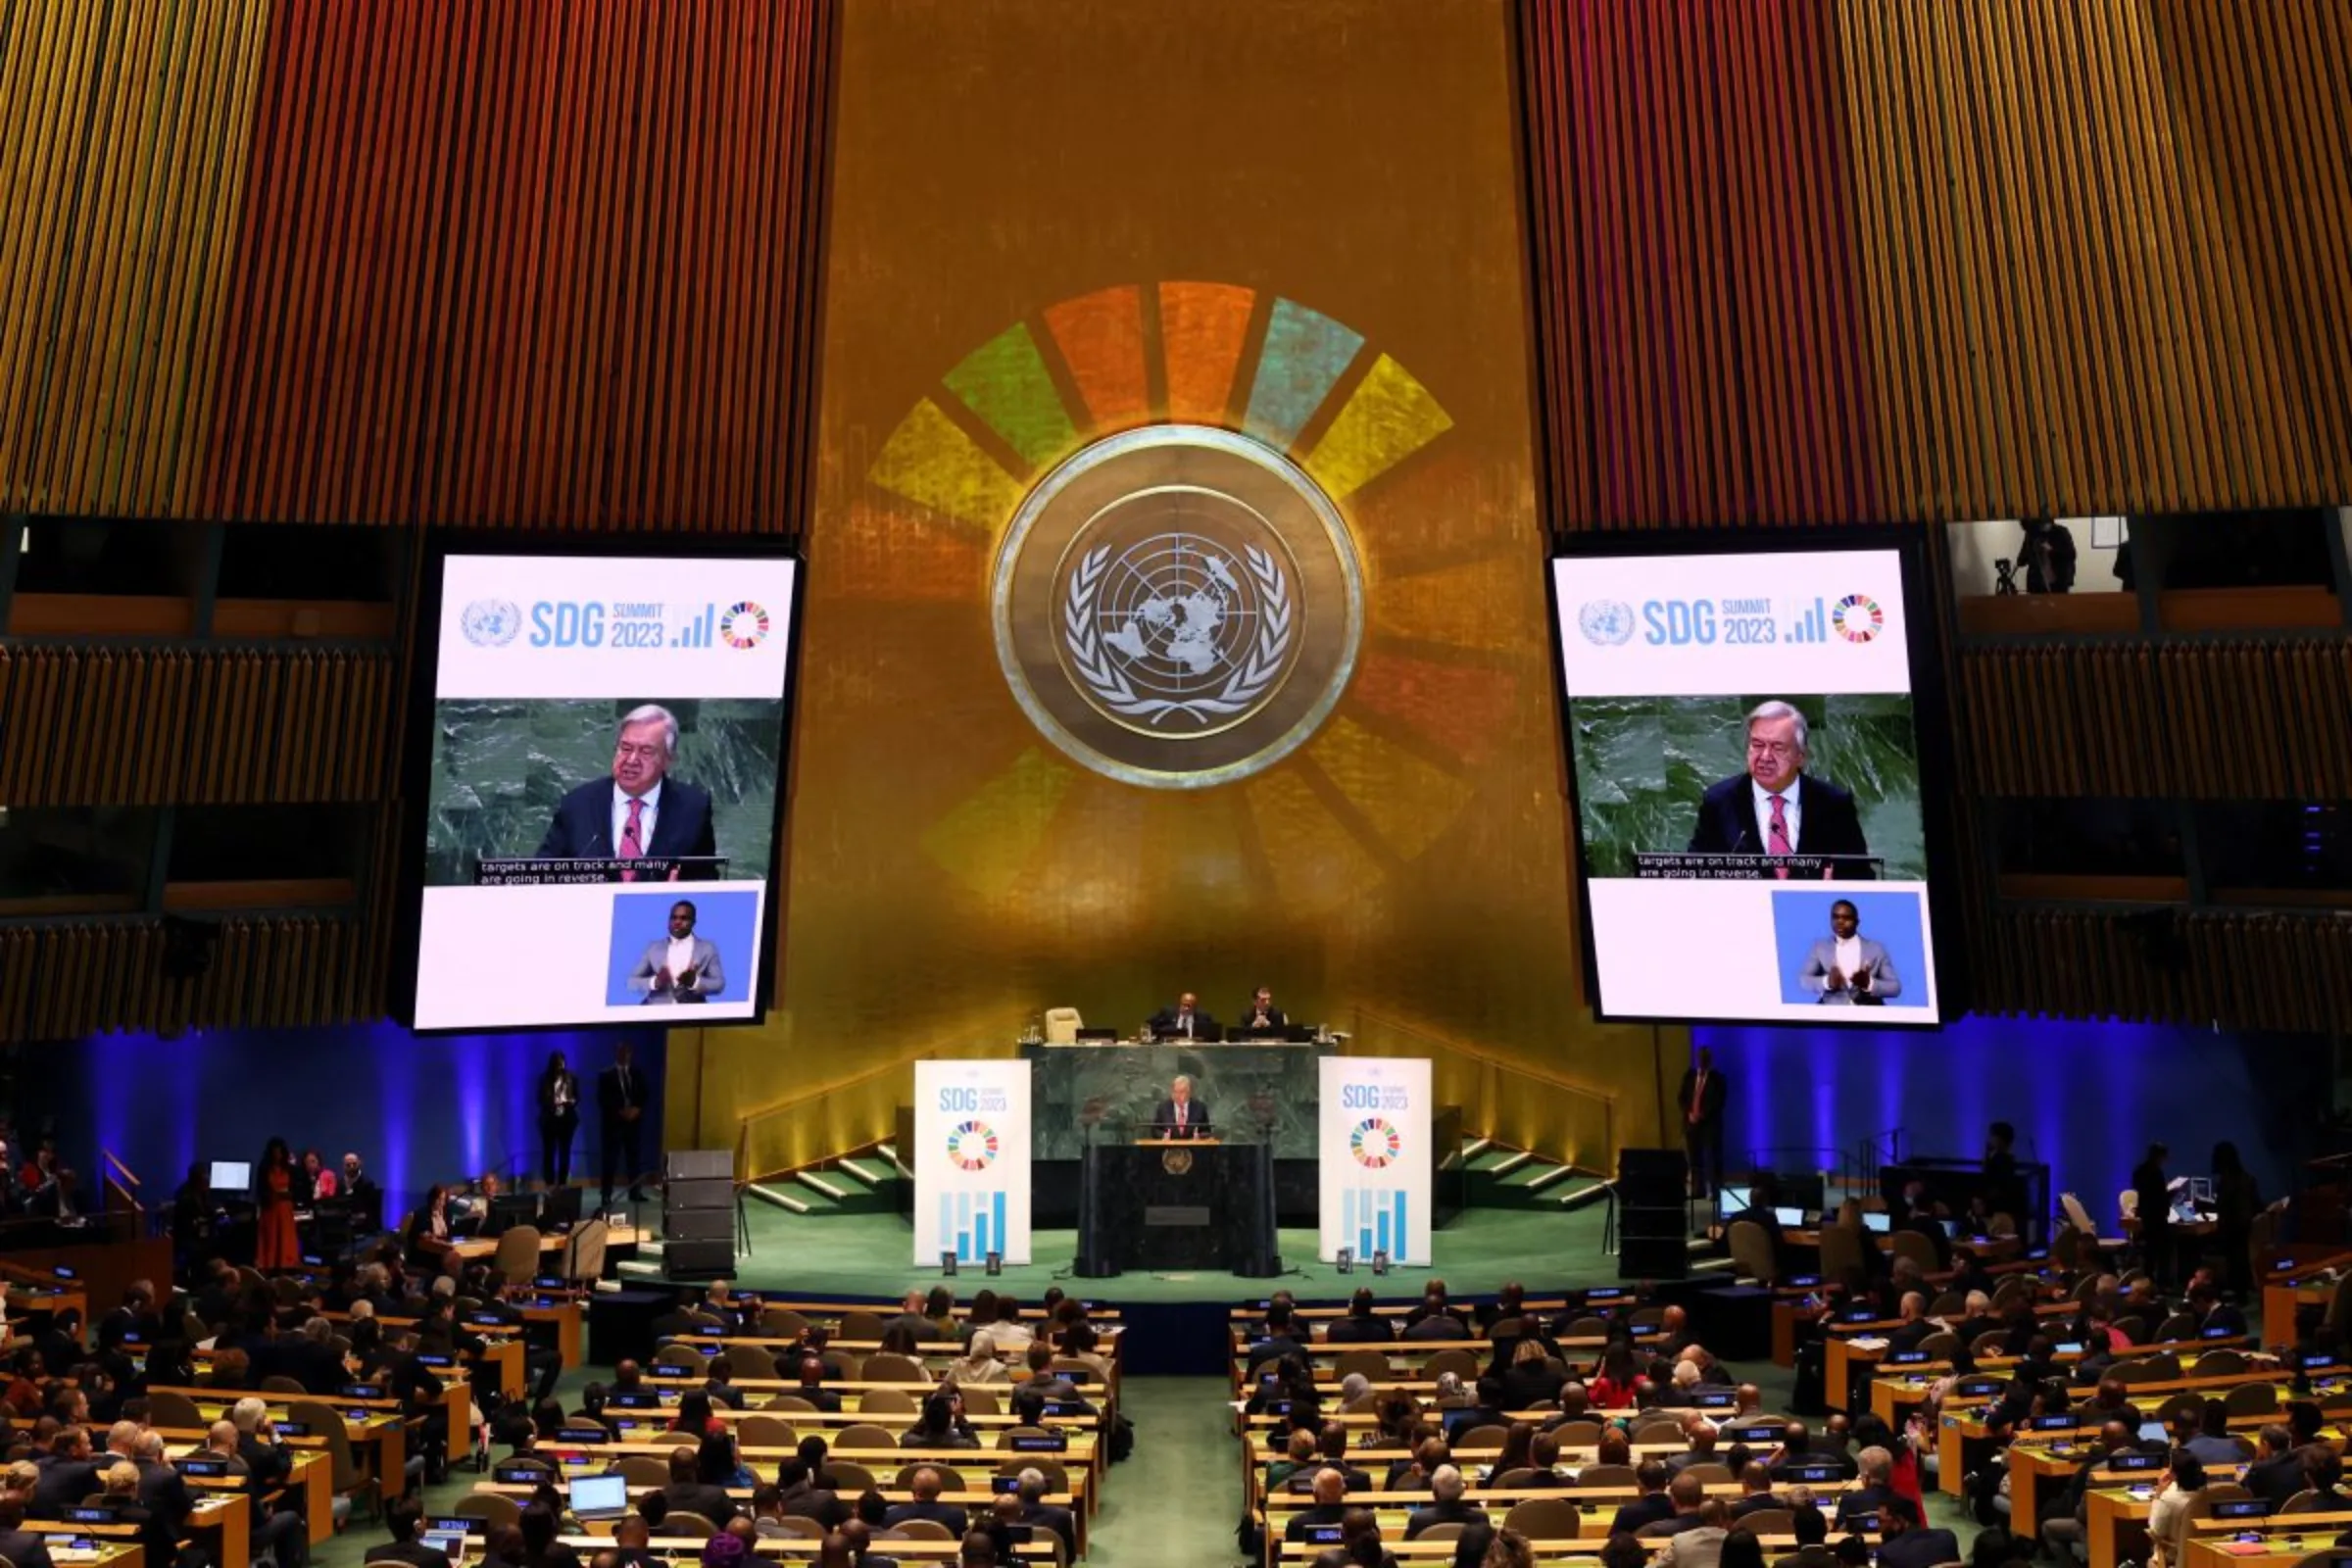 United Nations Secretary-General Antonio Guterres delivers a statement during the opening of the Sustainable Development Goals (SDG) Summit 2023, at U.N. headquarters in New York City, New York, U.S., September 18, 2023. REUTERS/Mike Segar